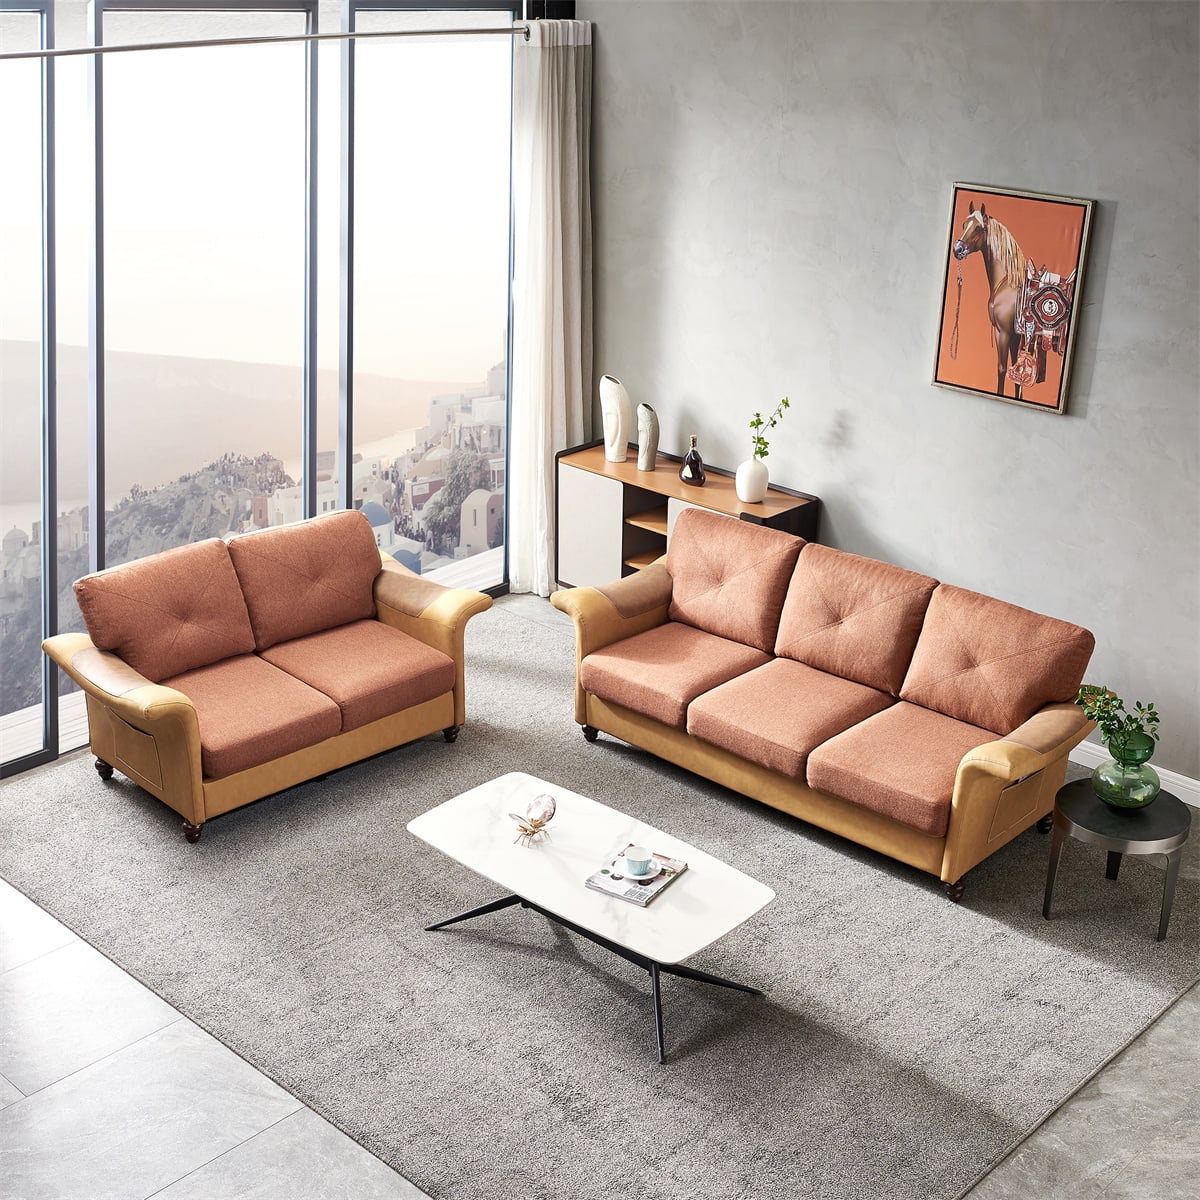 50 Width Accent Sofa, Modern Loveseat Sofa with 2 Pillows, Linen Tufted  Upholstered 2-Seater Sofa Couch with Back Cushions and Tapered Wood Legs